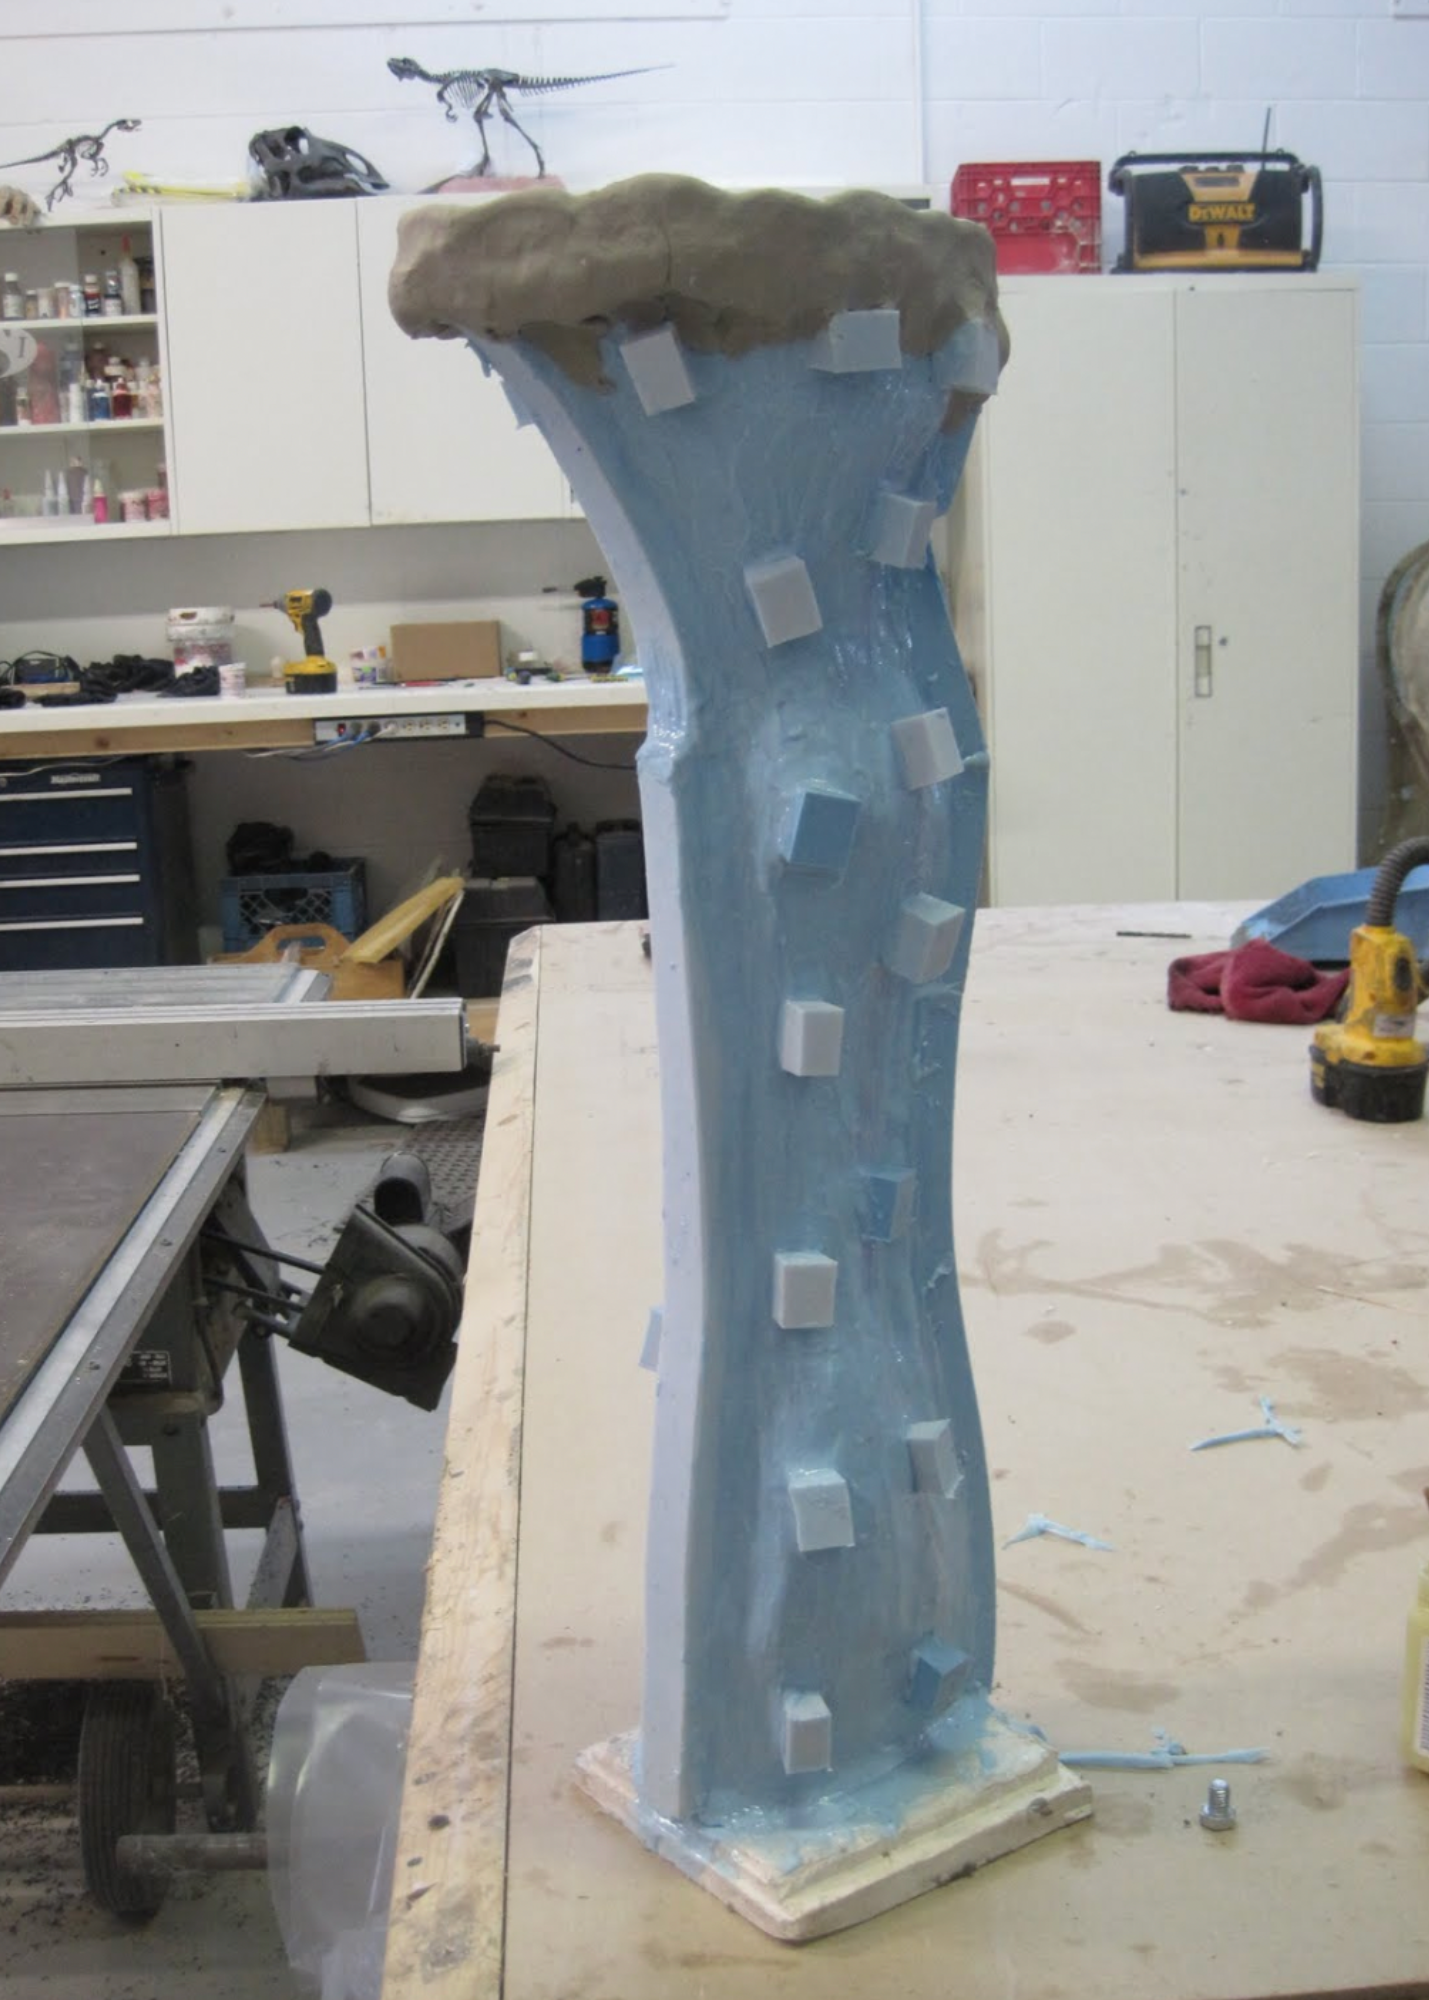  The equine leg mold now has the keys attached and is ready to have the bottom of the hoof poured. It then will have a fiberglass jacket applied, in three sections. then the mold of the leg exterior will be complete. 